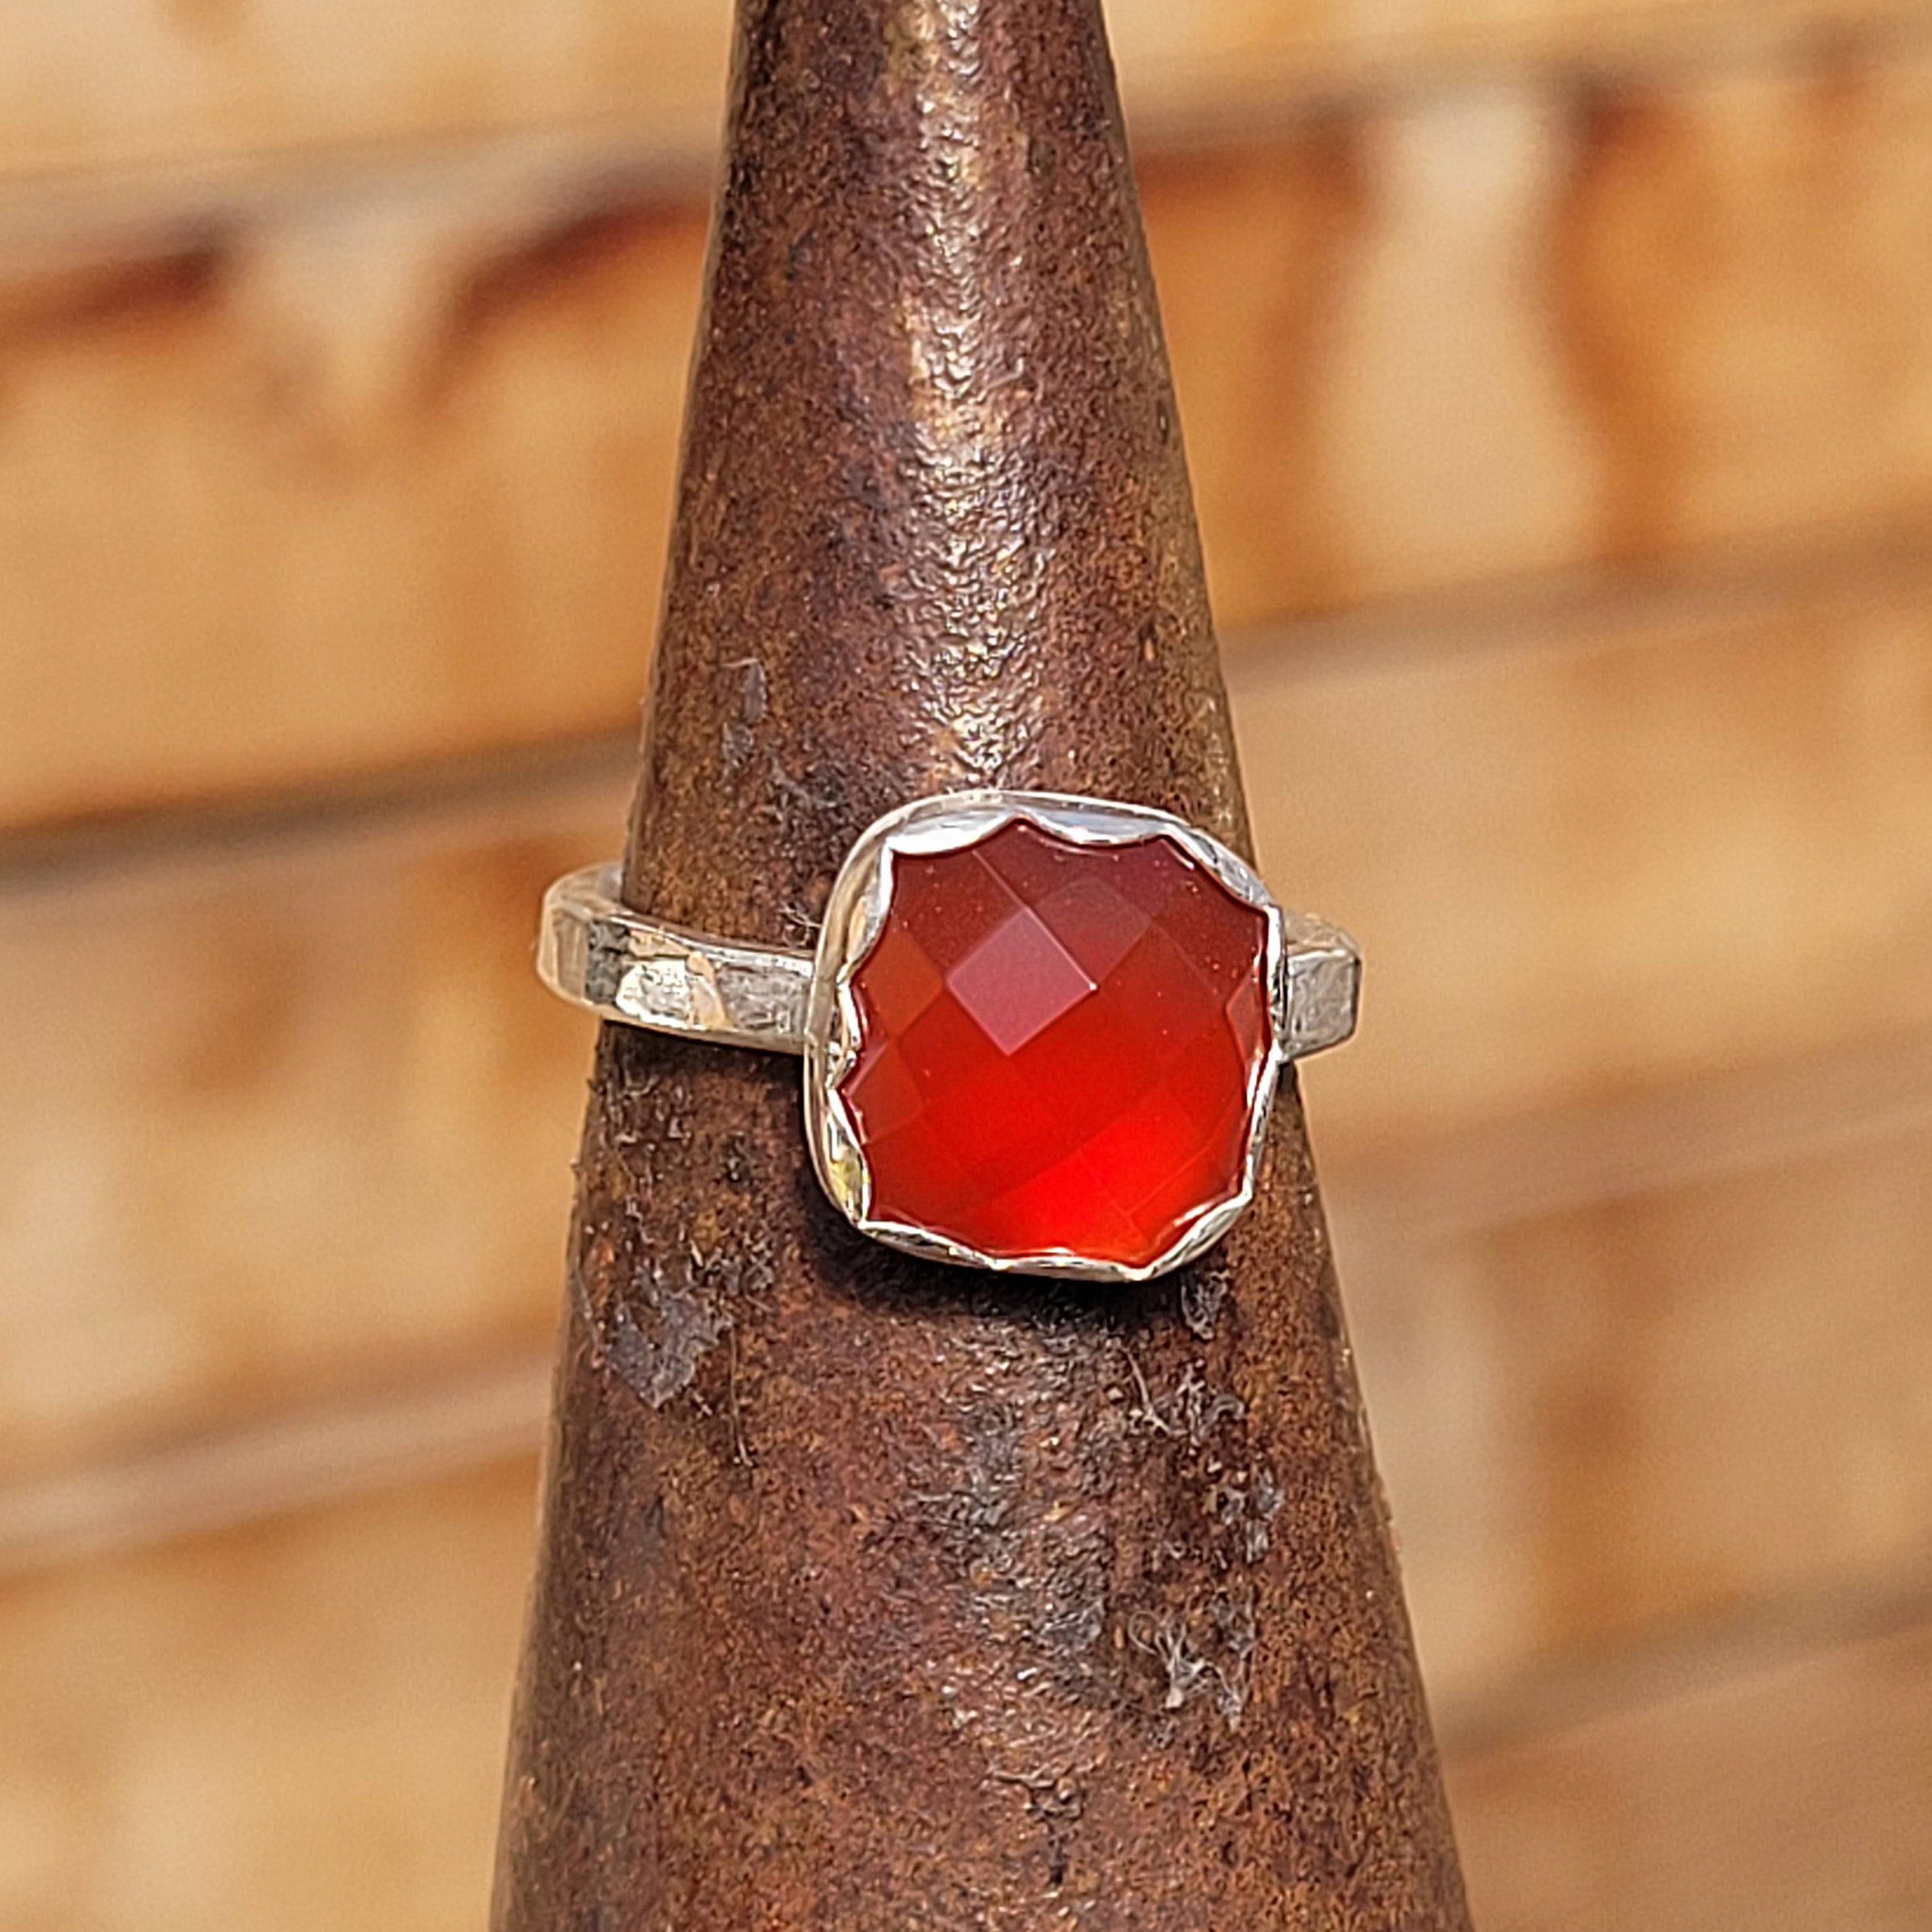 Carnelian & Silver Ring | Snapdragon Jewelry Designs